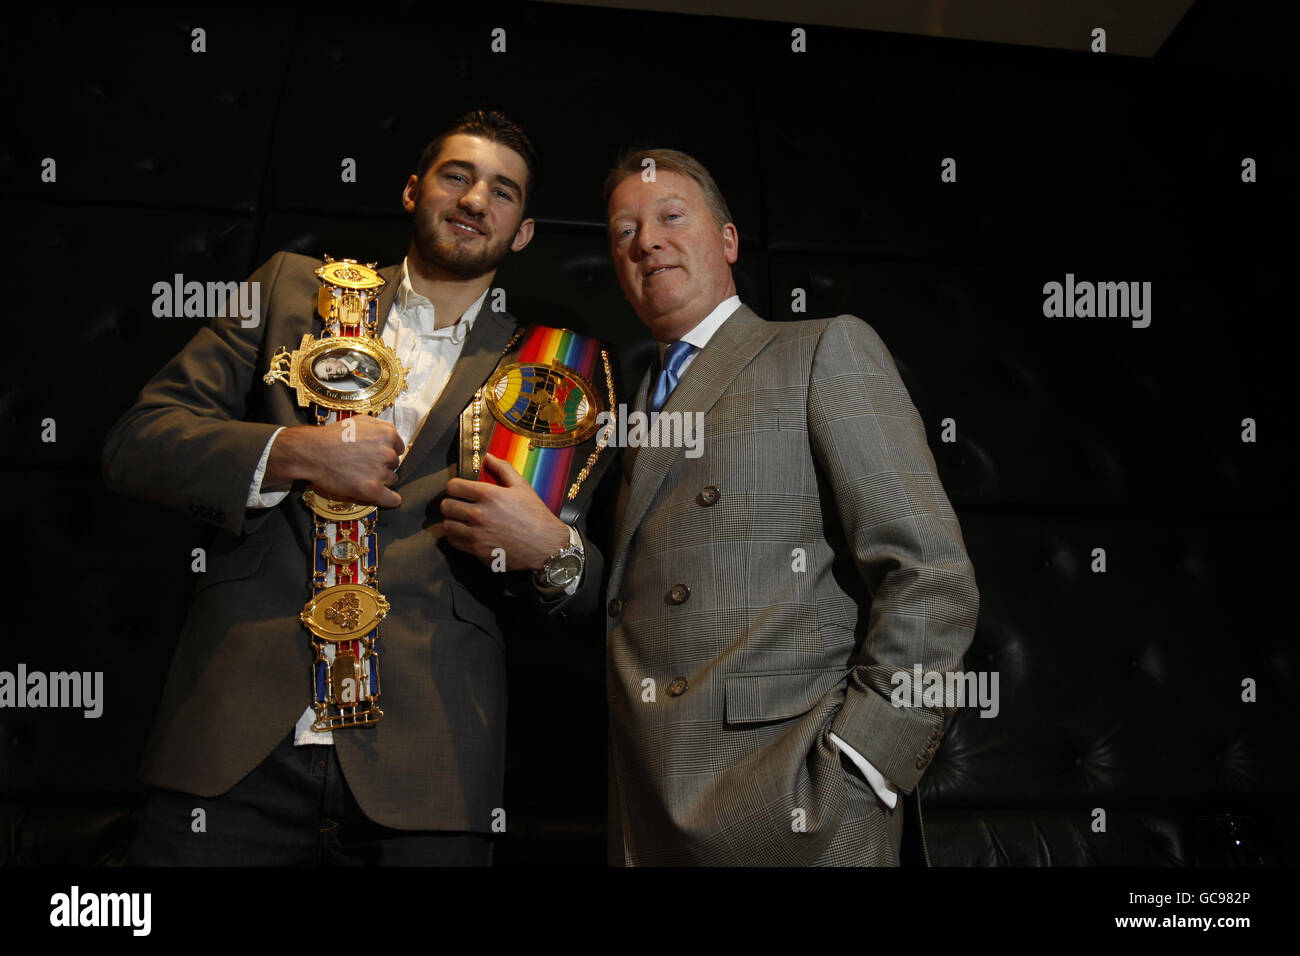 British boxer Nathan Cleverly (left) and promoter Frank Warren (right) during a press conference at The Little Italy, London. Stock Photo